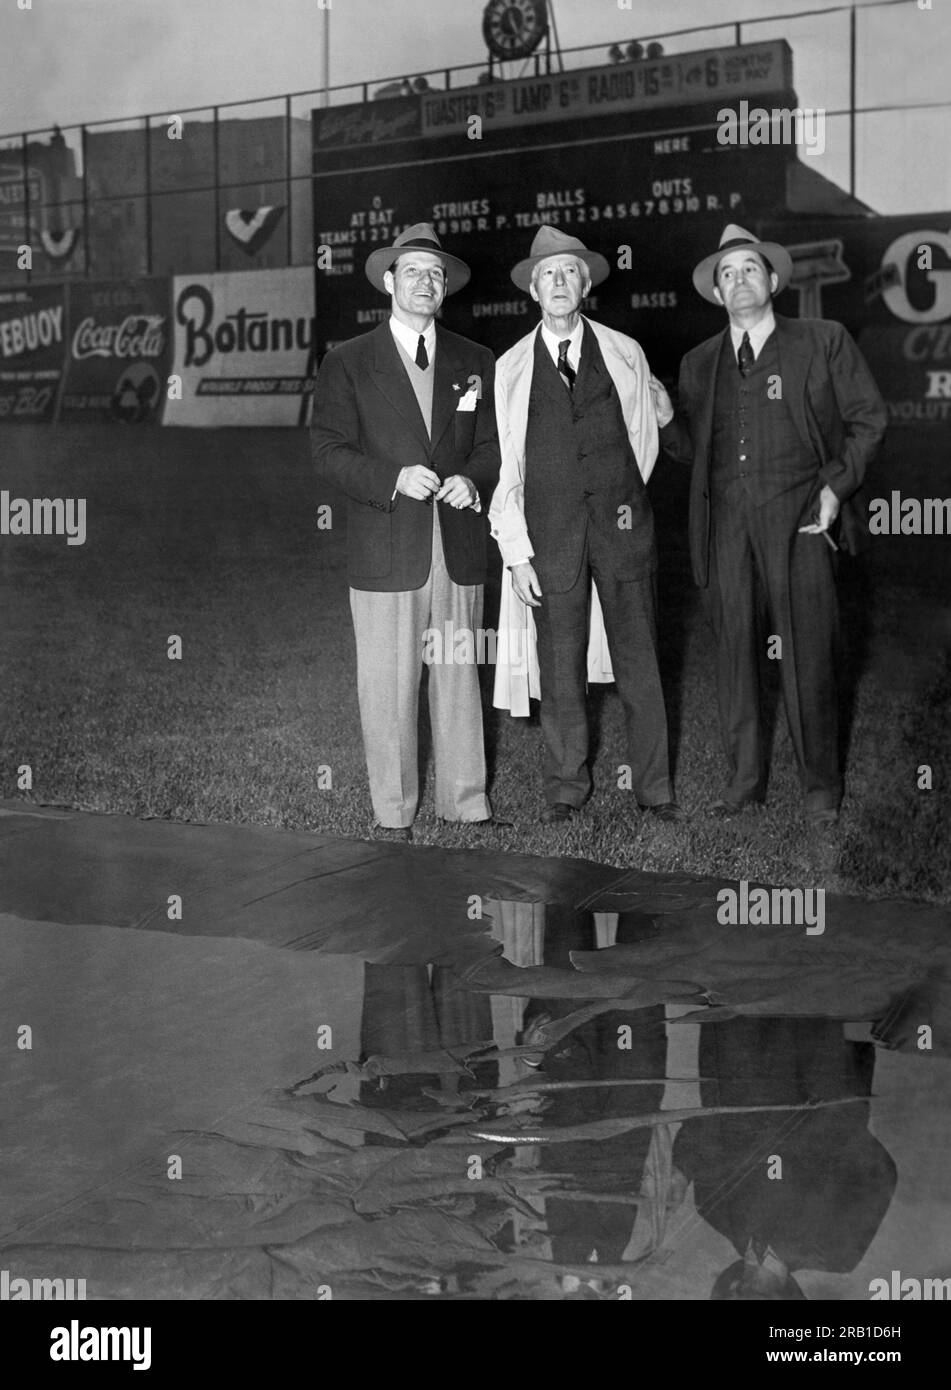 New York, New York:  October 3, 1941 Brooklyn Dodger manager Leo Durocher, Baseball Commissioner Kenesaw Landis and New York Yankee manager Joe McCarthy stand at the edge of the infield tarp and eye the dark skies that have postponed 'the subway' World Series Game 3 at Ebbets Field in Brooklyn. Stock Photo